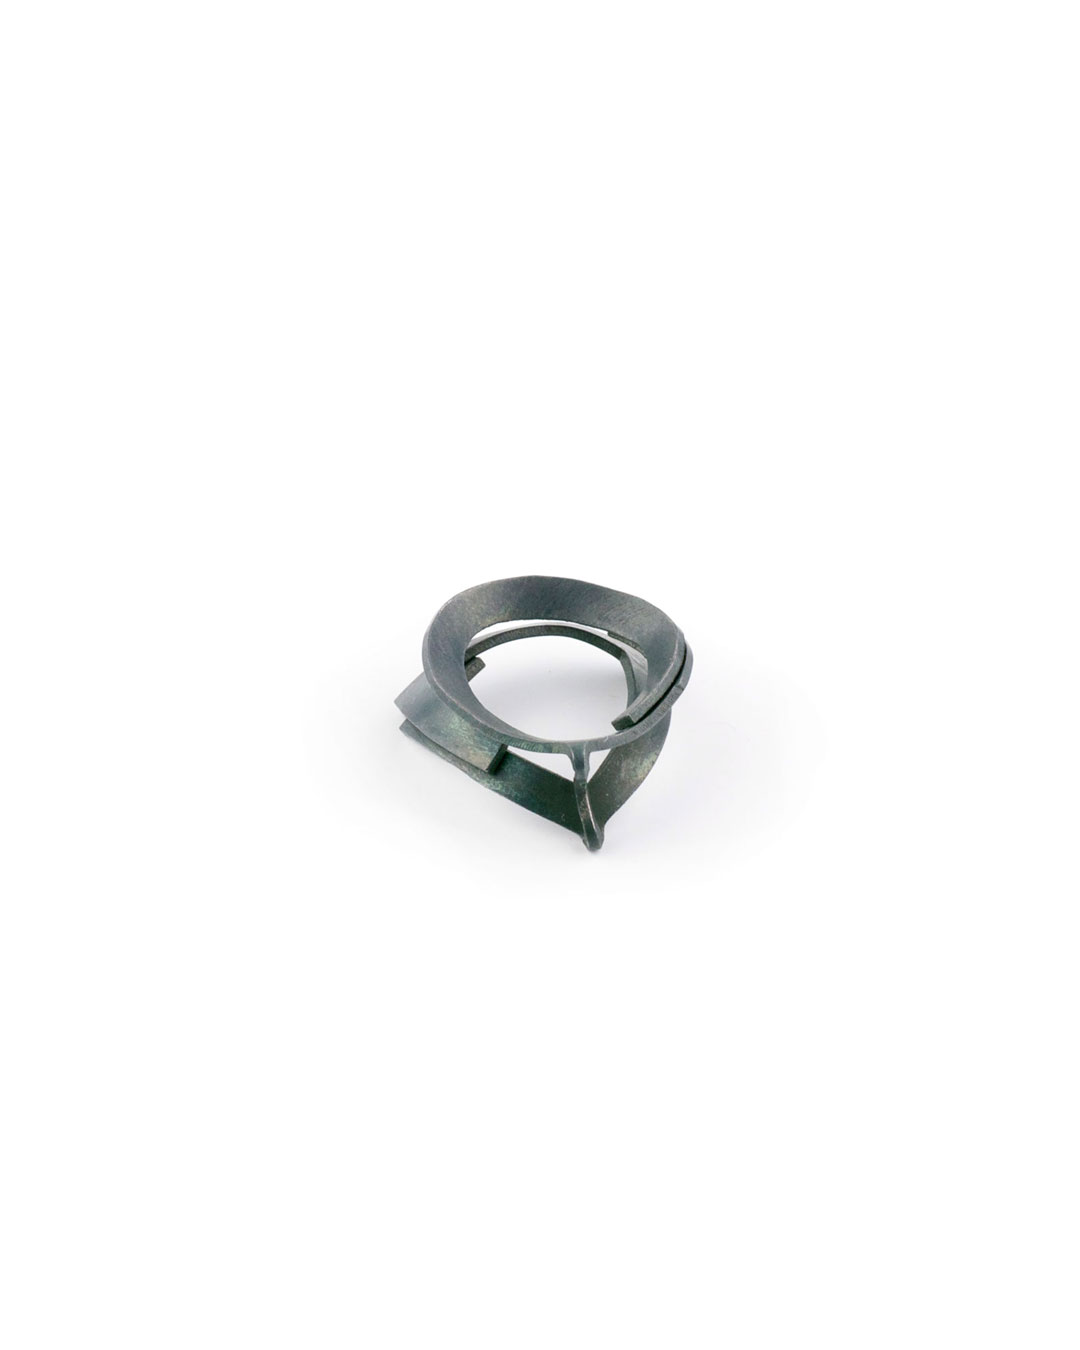 Dongchun Lee, untitled, 1998, ring; steel, 28 x 33 x 10 mm, €190